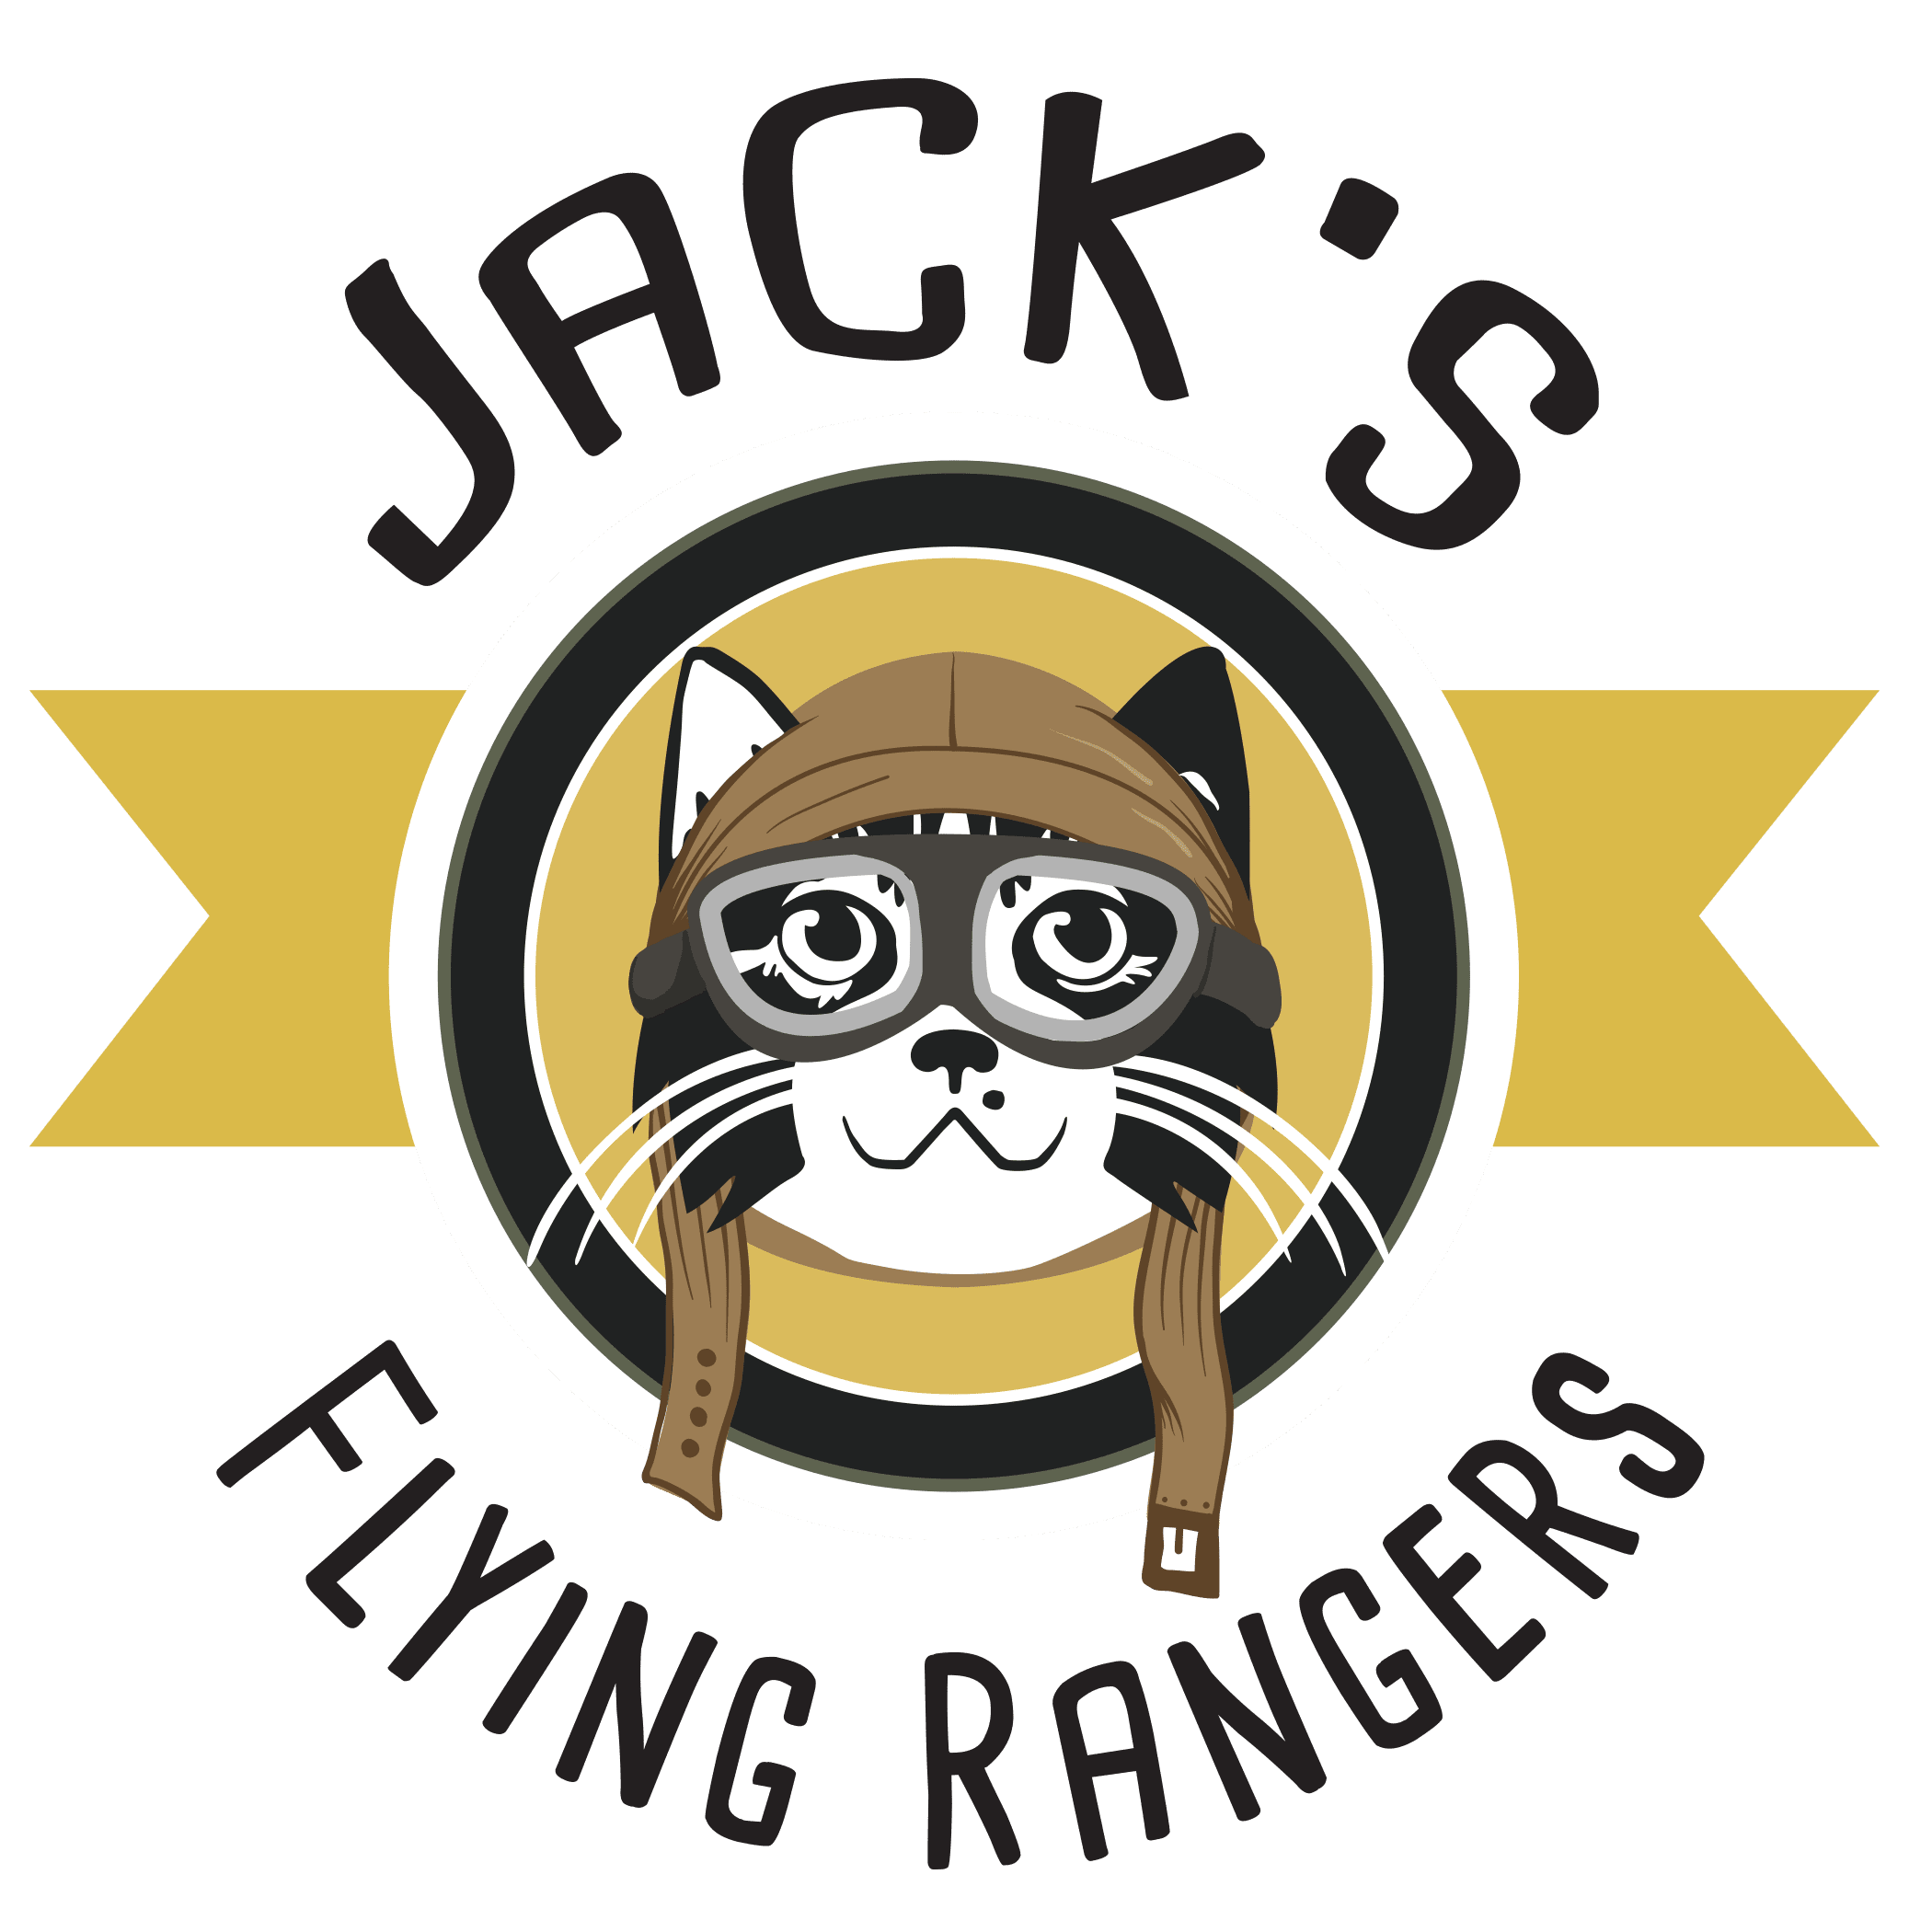 You are currently viewing Jack’s Flying Rangers: Episode 1 | Monadnock Oil & Vinegar